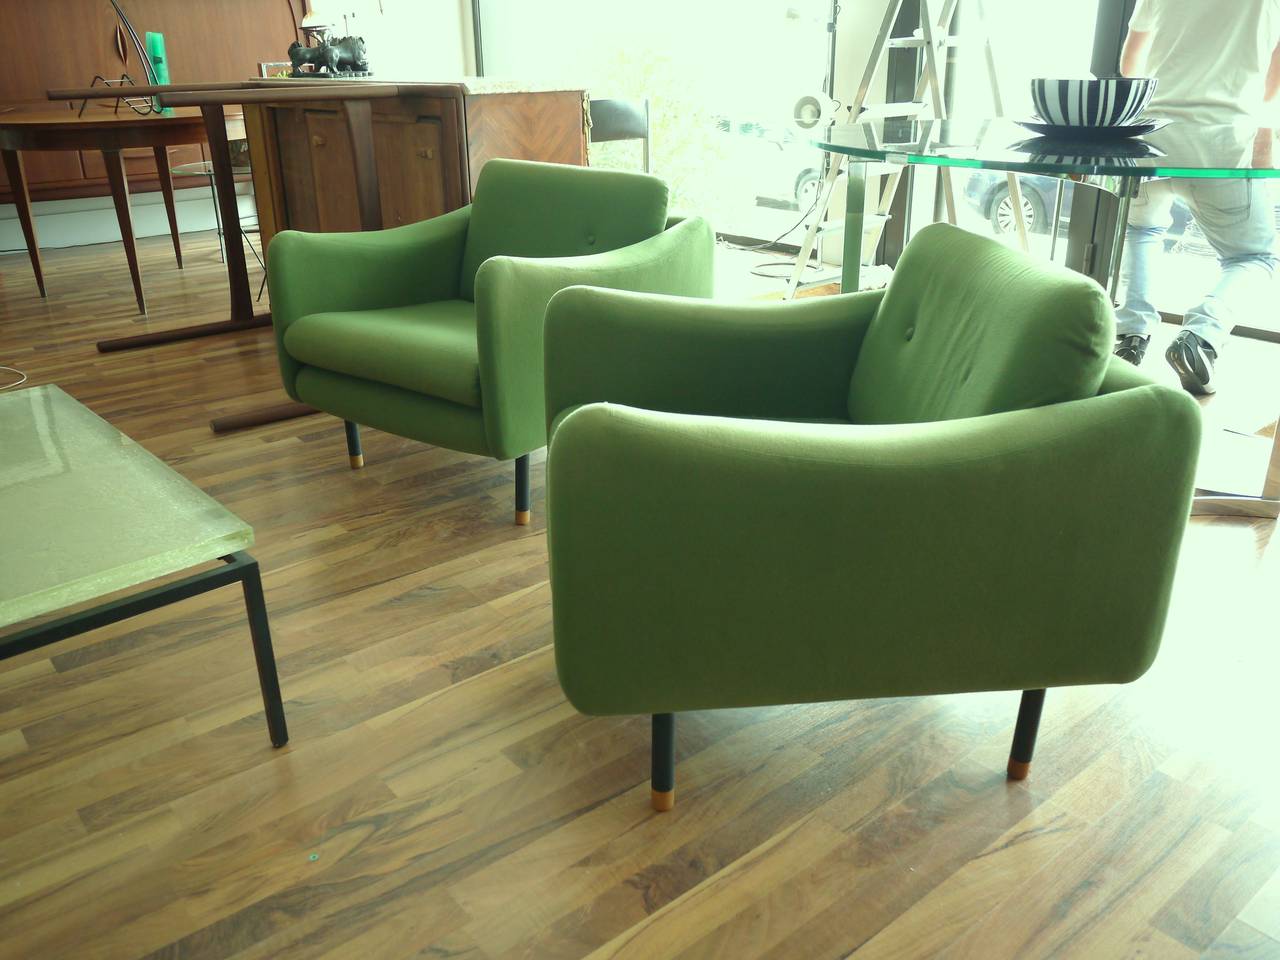 Living room suite, model Teckel designed by Michel Mortier for Steiner Editor in 1963. Two armchairs and a two seat sofa in original condition and original green wool fabric.